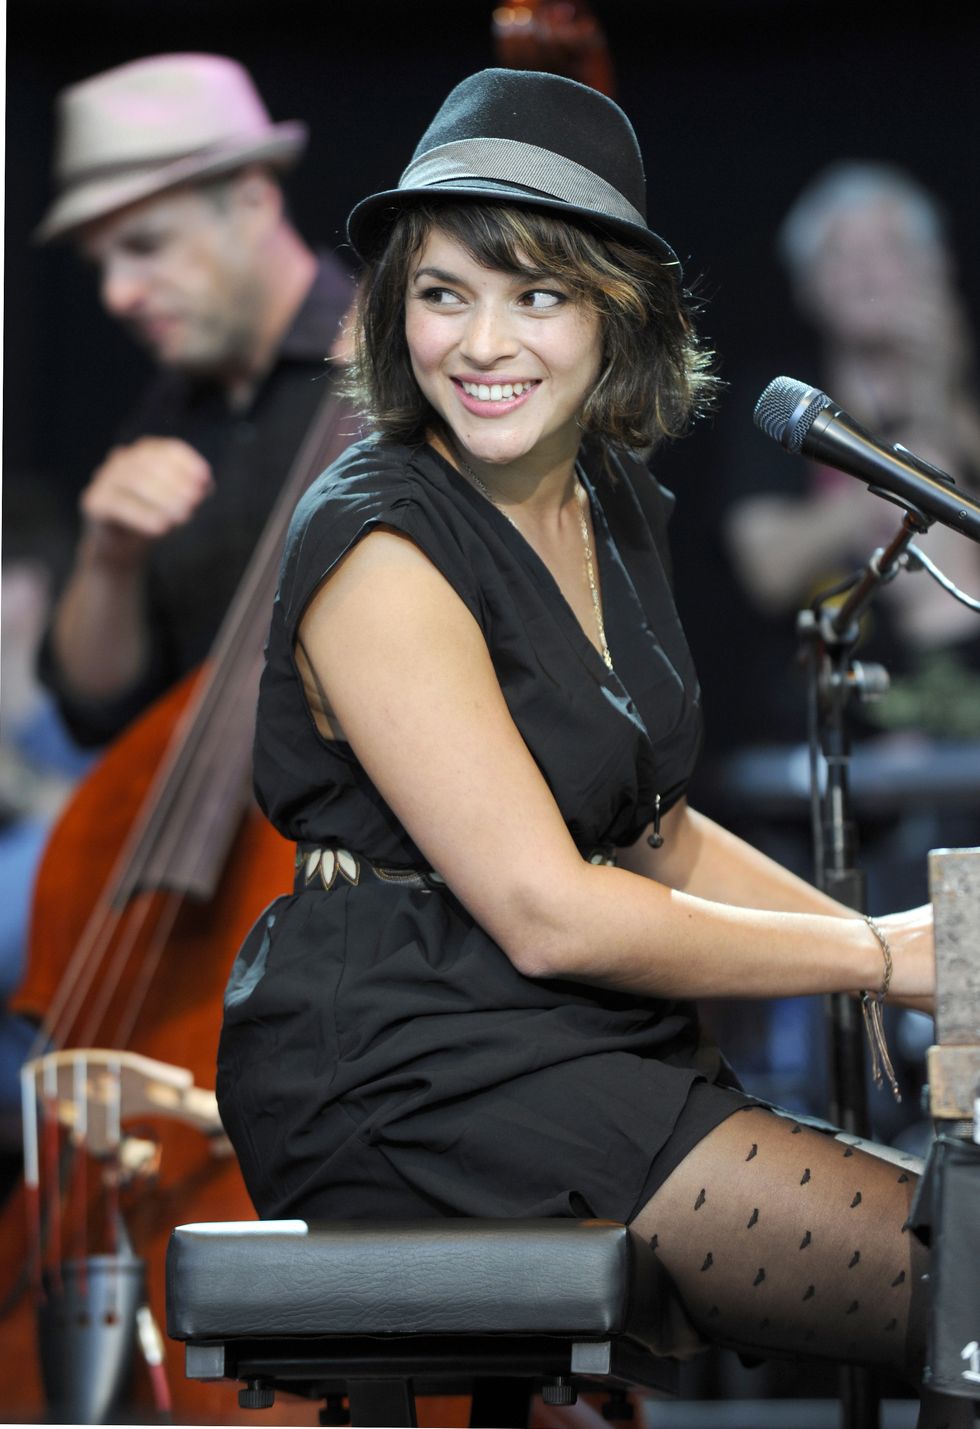 MOUNTAIN VIEW, CA - OCTOBER 22: Norah Jones performs as part of the 25th Annual Bridge School Benefit Finale at Shoreline Amphitheatre on October 22, 2011 in Mountain View, California. (Photo by Tim Mosenfelder/Getty Images)